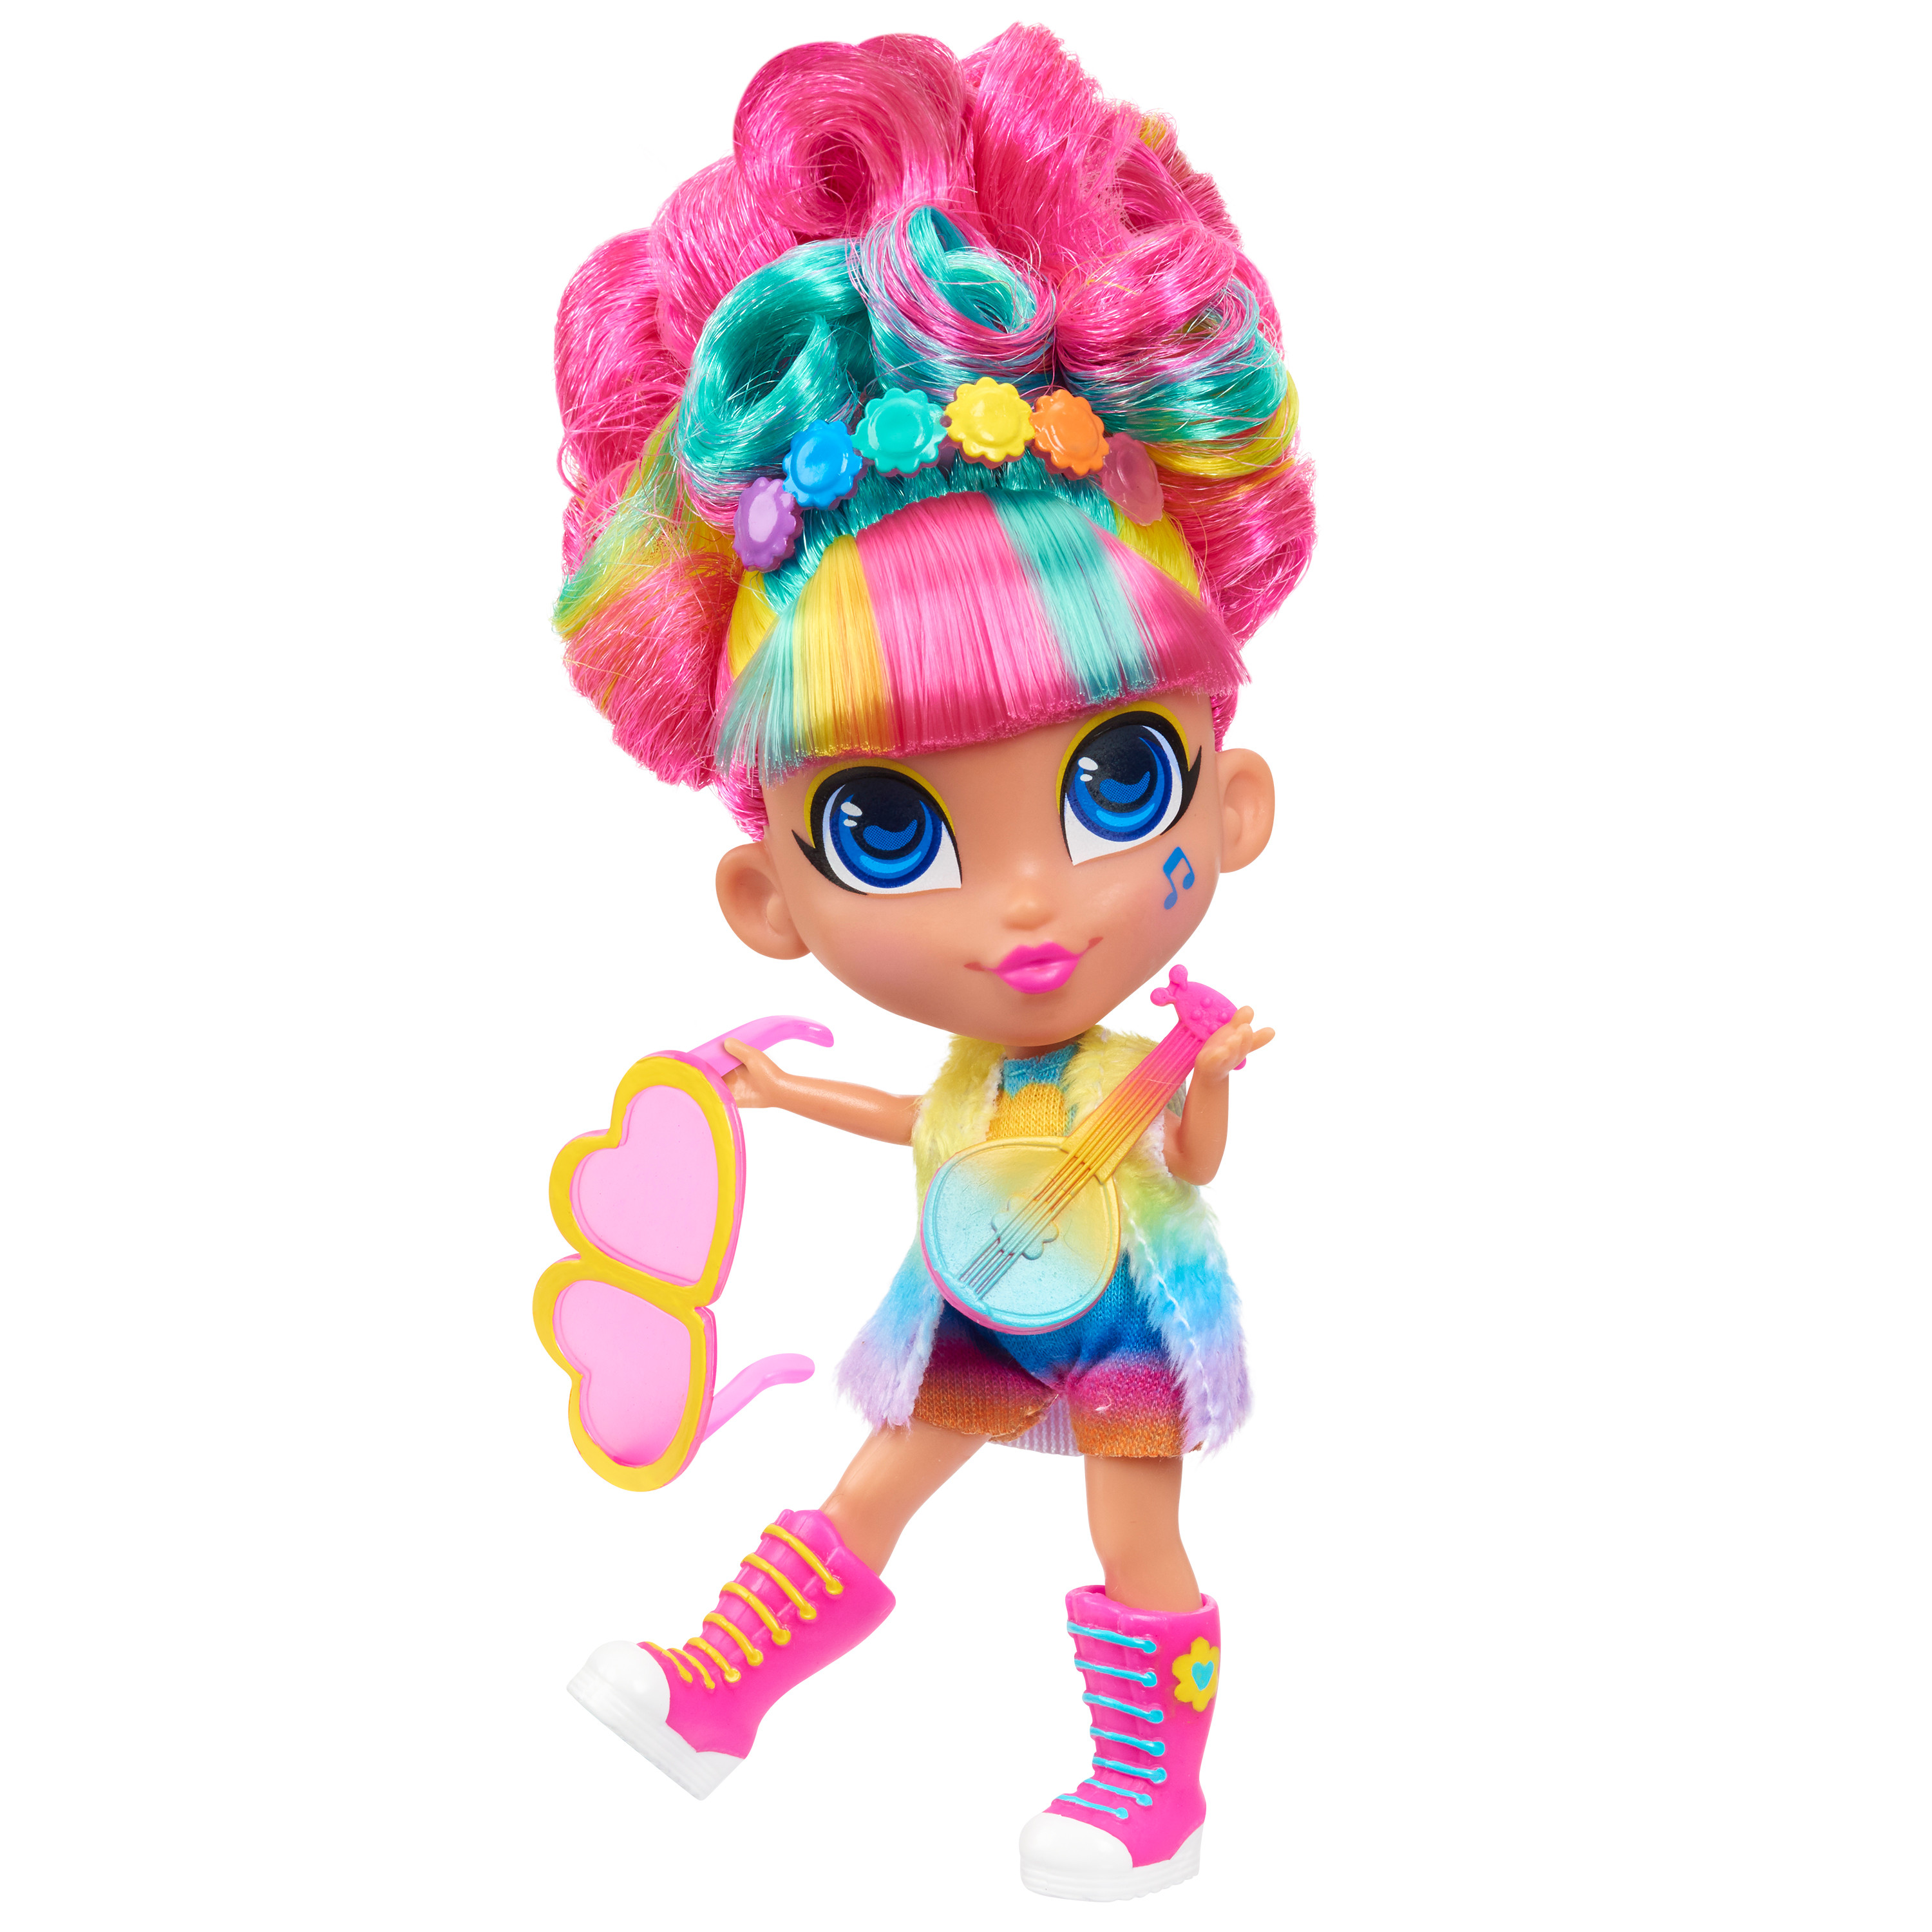 Hairdorables Loves Trolls World Tour,  Kids Toys for Ages 3 Up, Gifts and Presents - image 3 of 3